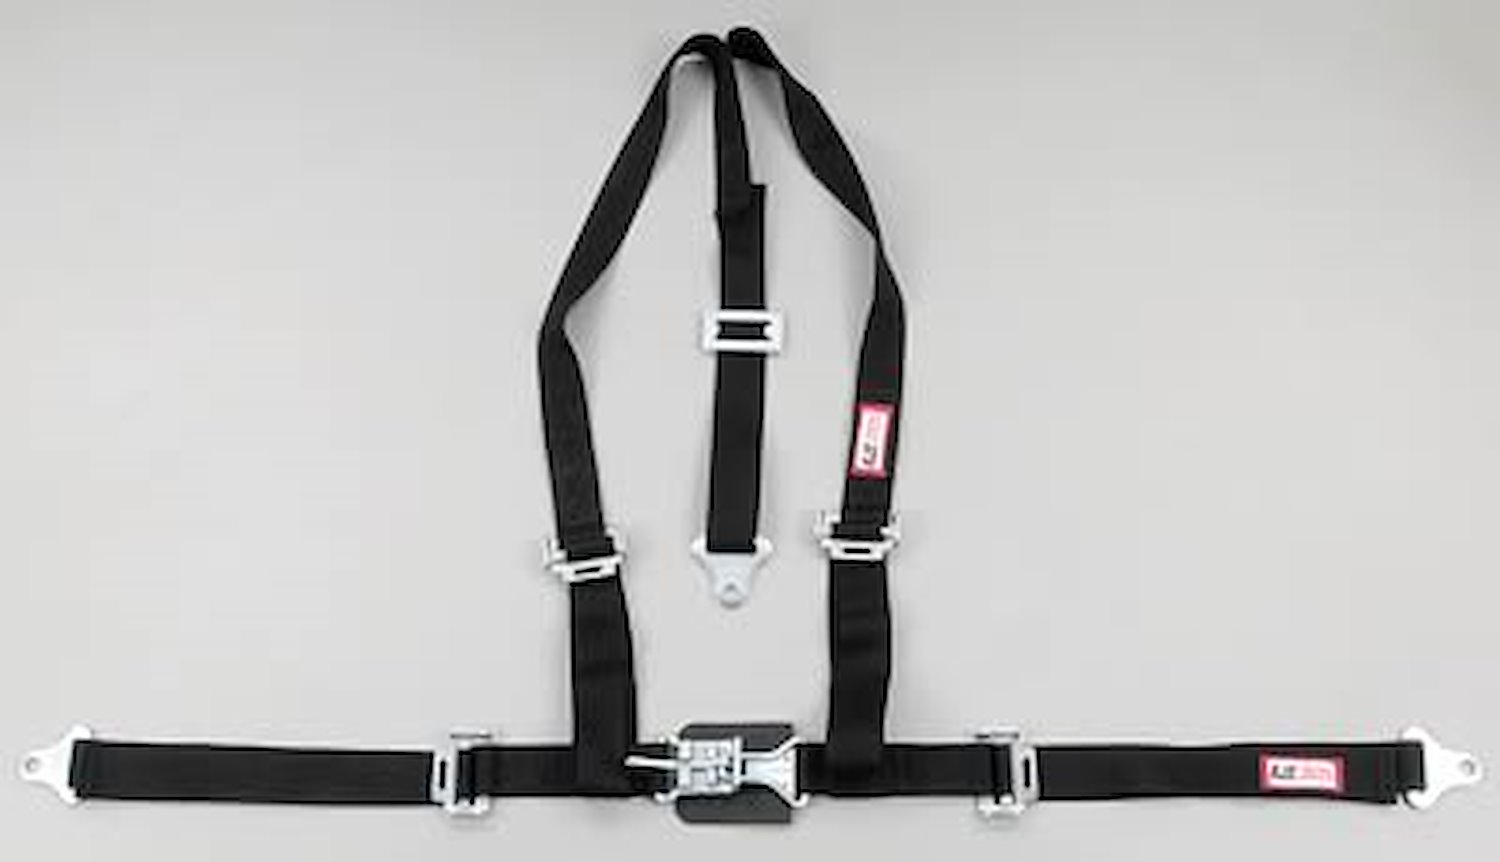 NON-SFI L&L HARNESS 3 PULL DOWN Lap Belt SNAP SEWN IN 2 S.H. Individual FLOOR Mount WRAP/SNAP GRAY